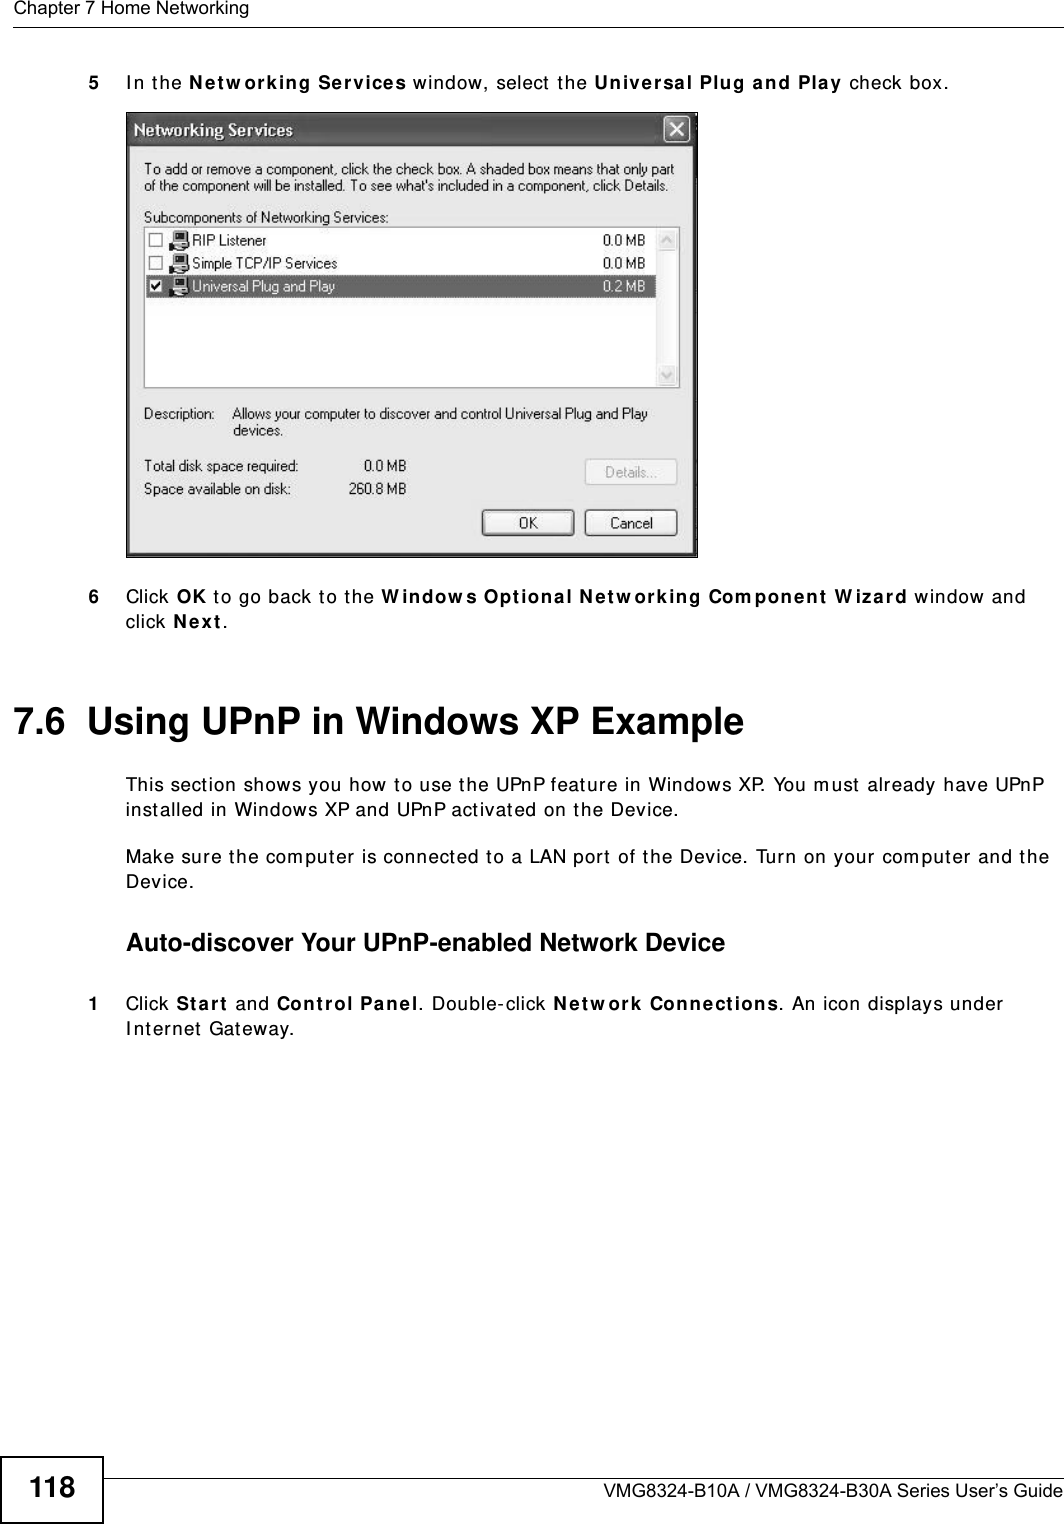 Chapter 7 Home NetworkingVMG8324-B10A / VMG8324-B30A Series User’s Guide1185I n t he N e t w or k ing Ser vices window, select  t he Univ e r sal Plug a n d Pla y check box. Networking Services6Click OK to go back t o t he W indow s Opt ion a l N e t w or k ing Com pon e nt  W iza rd window and click N e x t . 7.6  Using UPnP in Windows XP ExampleThis sect ion shows you how t o use t he UPnP feat ure in Windows XP. You m ust  already have UPnP inst alled in Windows XP and UPnP activat ed on the Device.Make sure t he com puter is connected t o a LAN port  of the Device. Turn on your com puter and the Device. Auto-discover Your UPnP-enabled Network Device1Click St a r t  and Con t r ol Pa n e l. Double- click N et w ork  Con ne ct ions. An icon displays under I nt ernet  Gat eway.